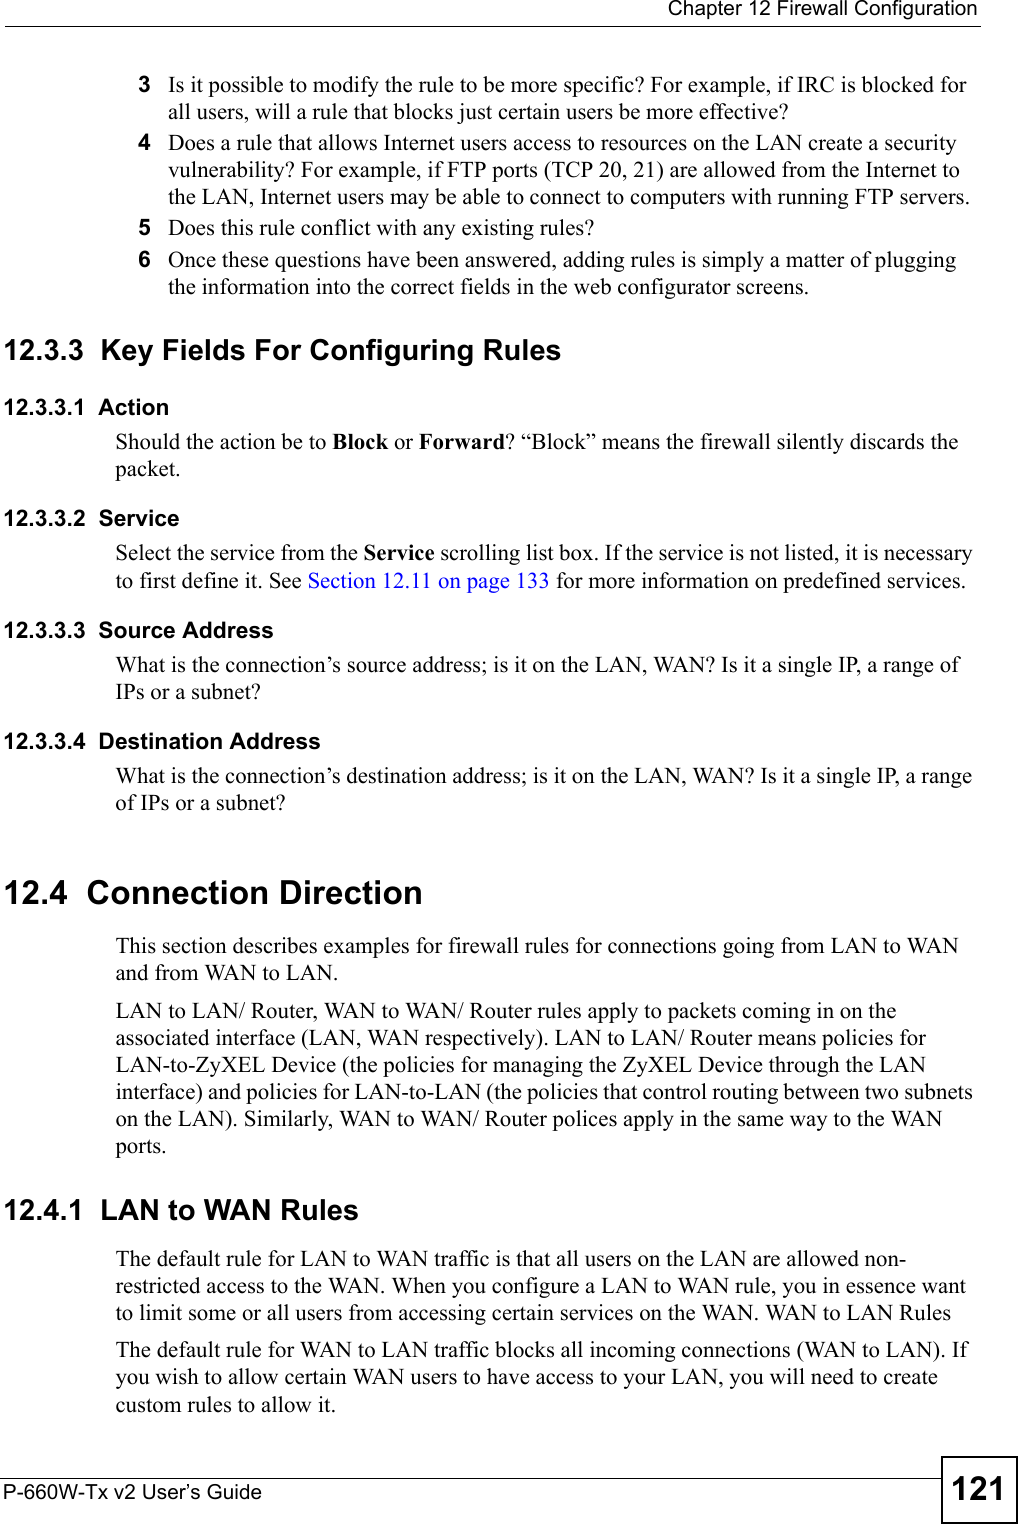  Chapter 12 Firewall ConfigurationP-660W-Tx v2 User’s Guide 1213Is it possible to modify the rule to be more specific? For example, if IRC is blocked for all users, will a rule that blocks just certain users be more effective?4Does a rule that allows Internet users access to resources on the LAN create a security vulnerability? For example, if FTP ports (TCP 20, 21) are allowed from the Internet to the LAN, Internet users may be able to connect to computers with running FTP servers.5Does this rule conflict with any existing rules?6Once these questions have been answered, adding rules is simply a matter of plugging the information into the correct fields in the web configurator screens.12.3.3  Key Fields For Configuring Rules12.3.3.1  ActionShould the action be to Block or Forward? “Block” means the firewall silently discards the packet.12.3.3.2  ServiceSelect the service from the Service scrolling list box. If the service is not listed, it is necessary to first define it. See Section 12.11 on page 133 for more information on predefined services.12.3.3.3  Source AddressWhat is the connection’s source address; is it on the LAN, WAN? Is it a single IP, a range of IPs or a subnet?12.3.3.4  Destination AddressWhat is the connection’s destination address; is it on the LAN, WAN? Is it a single IP, a range of IPs or a subnet?12.4  Connection DirectionThis section describes examples for firewall rules for connections going from LAN to WAN and from WAN to LAN. LAN to LAN/ Router, WAN to WAN/ Router rules apply to packets coming in on the associated interface (LAN, WAN respectively). LAN to LAN/ Router means policies for LAN-to-ZyXEL Device (the policies for managing the ZyXEL Device through the LAN interface) and policies for LAN-to-LAN (the policies that control routing between two subnets on the LAN). Similarly, WAN to WAN/ Router polices apply in the same way to the WAN ports.12.4.1  LAN to WAN RulesThe default rule for LAN to WAN traffic is that all users on the LAN are allowed non-restricted access to the WAN. When you configure a LAN to WAN rule, you in essence want to limit some or all users from accessing certain services on the WAN. WAN to LAN RulesThe default rule for WAN to LAN traffic blocks all incoming connections (WAN to LAN). If you wish to allow certain WAN users to have access to your LAN, you will need to create custom rules to allow it. 